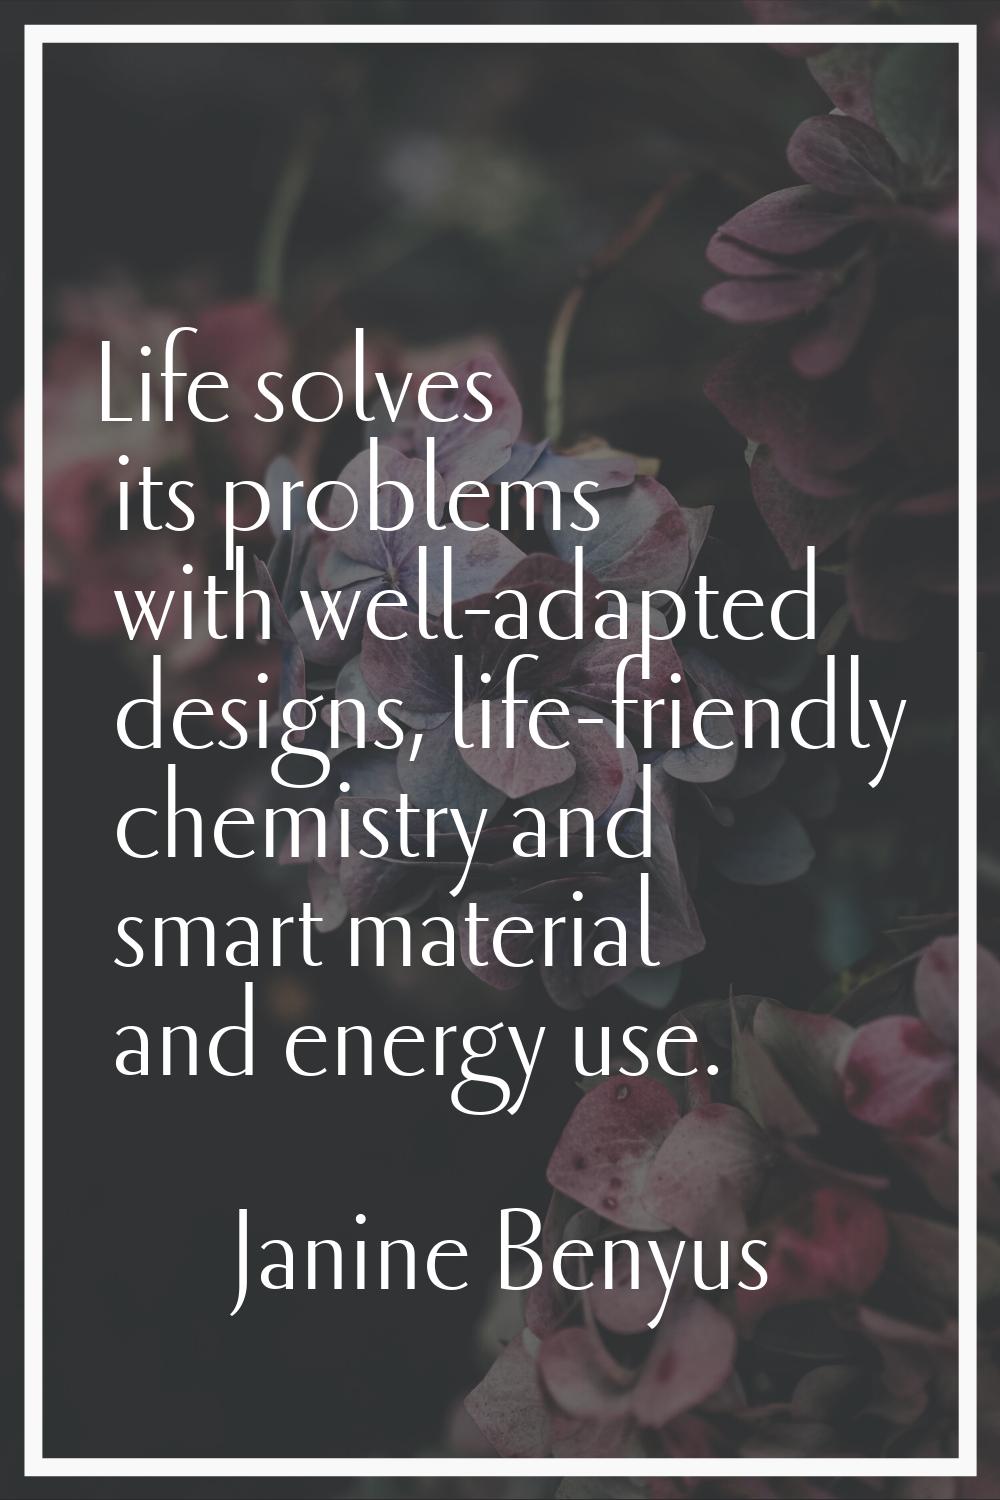 Life solves its problems with well-adapted designs, life-friendly chemistry and smart material and 